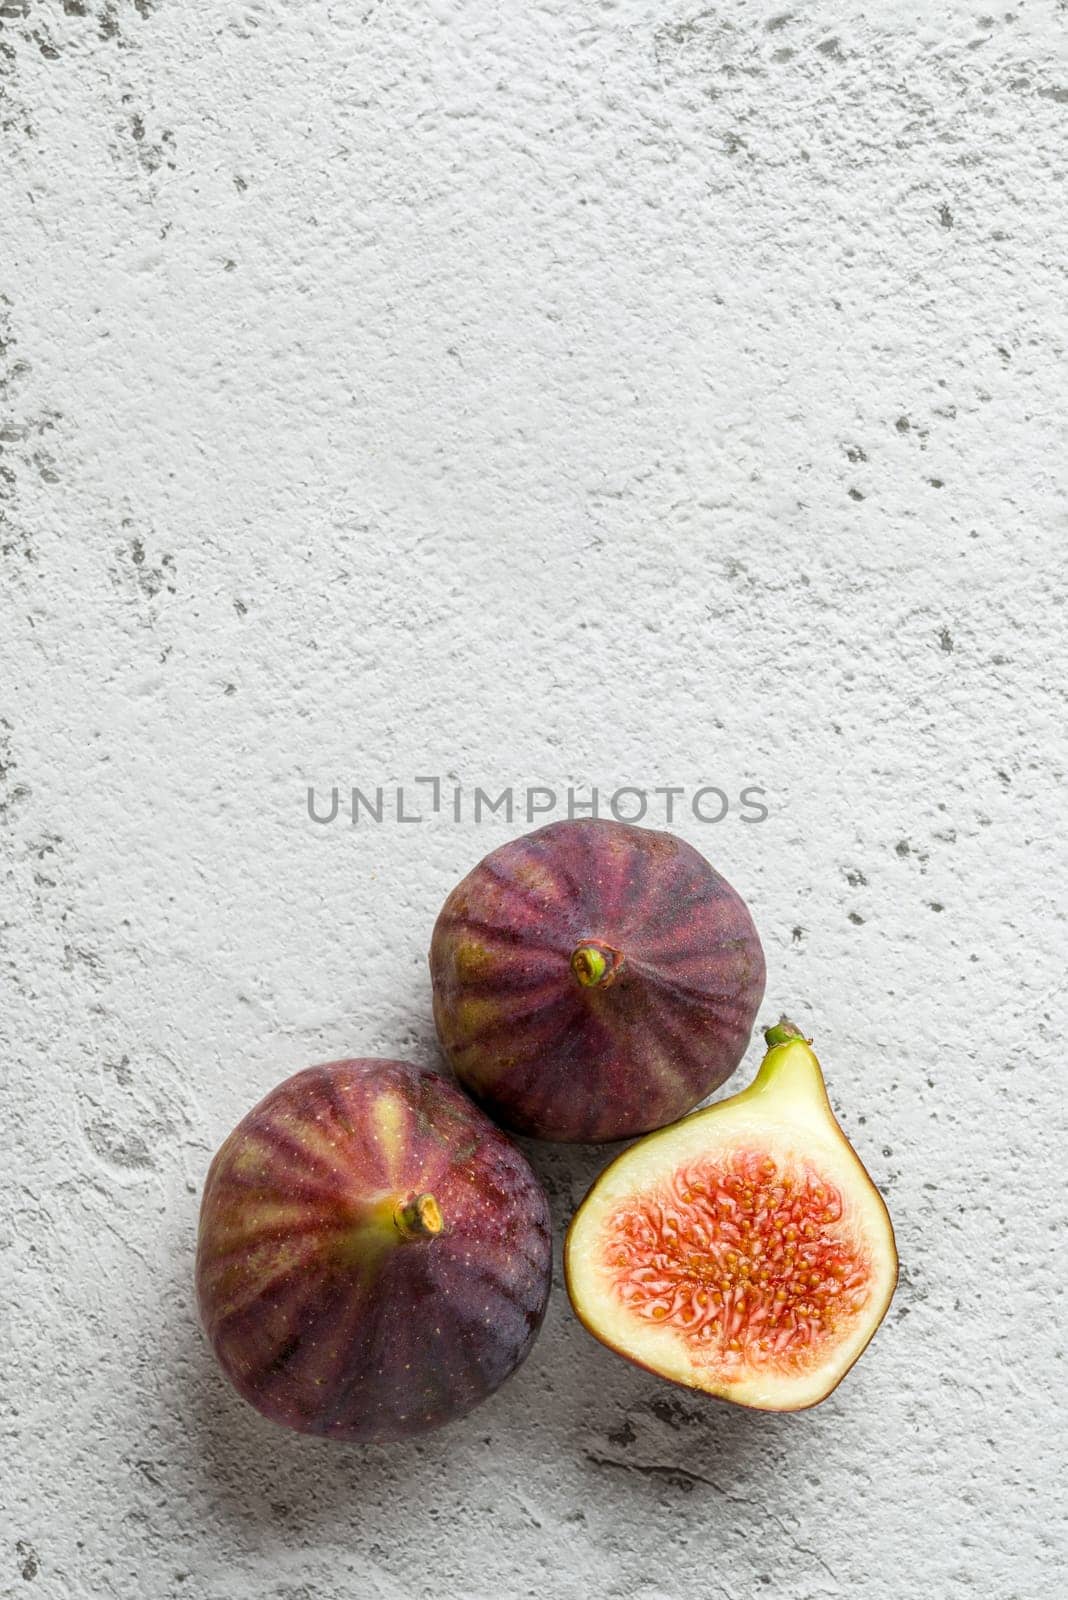 View of whole and cut organic figs on stone table by Sonat